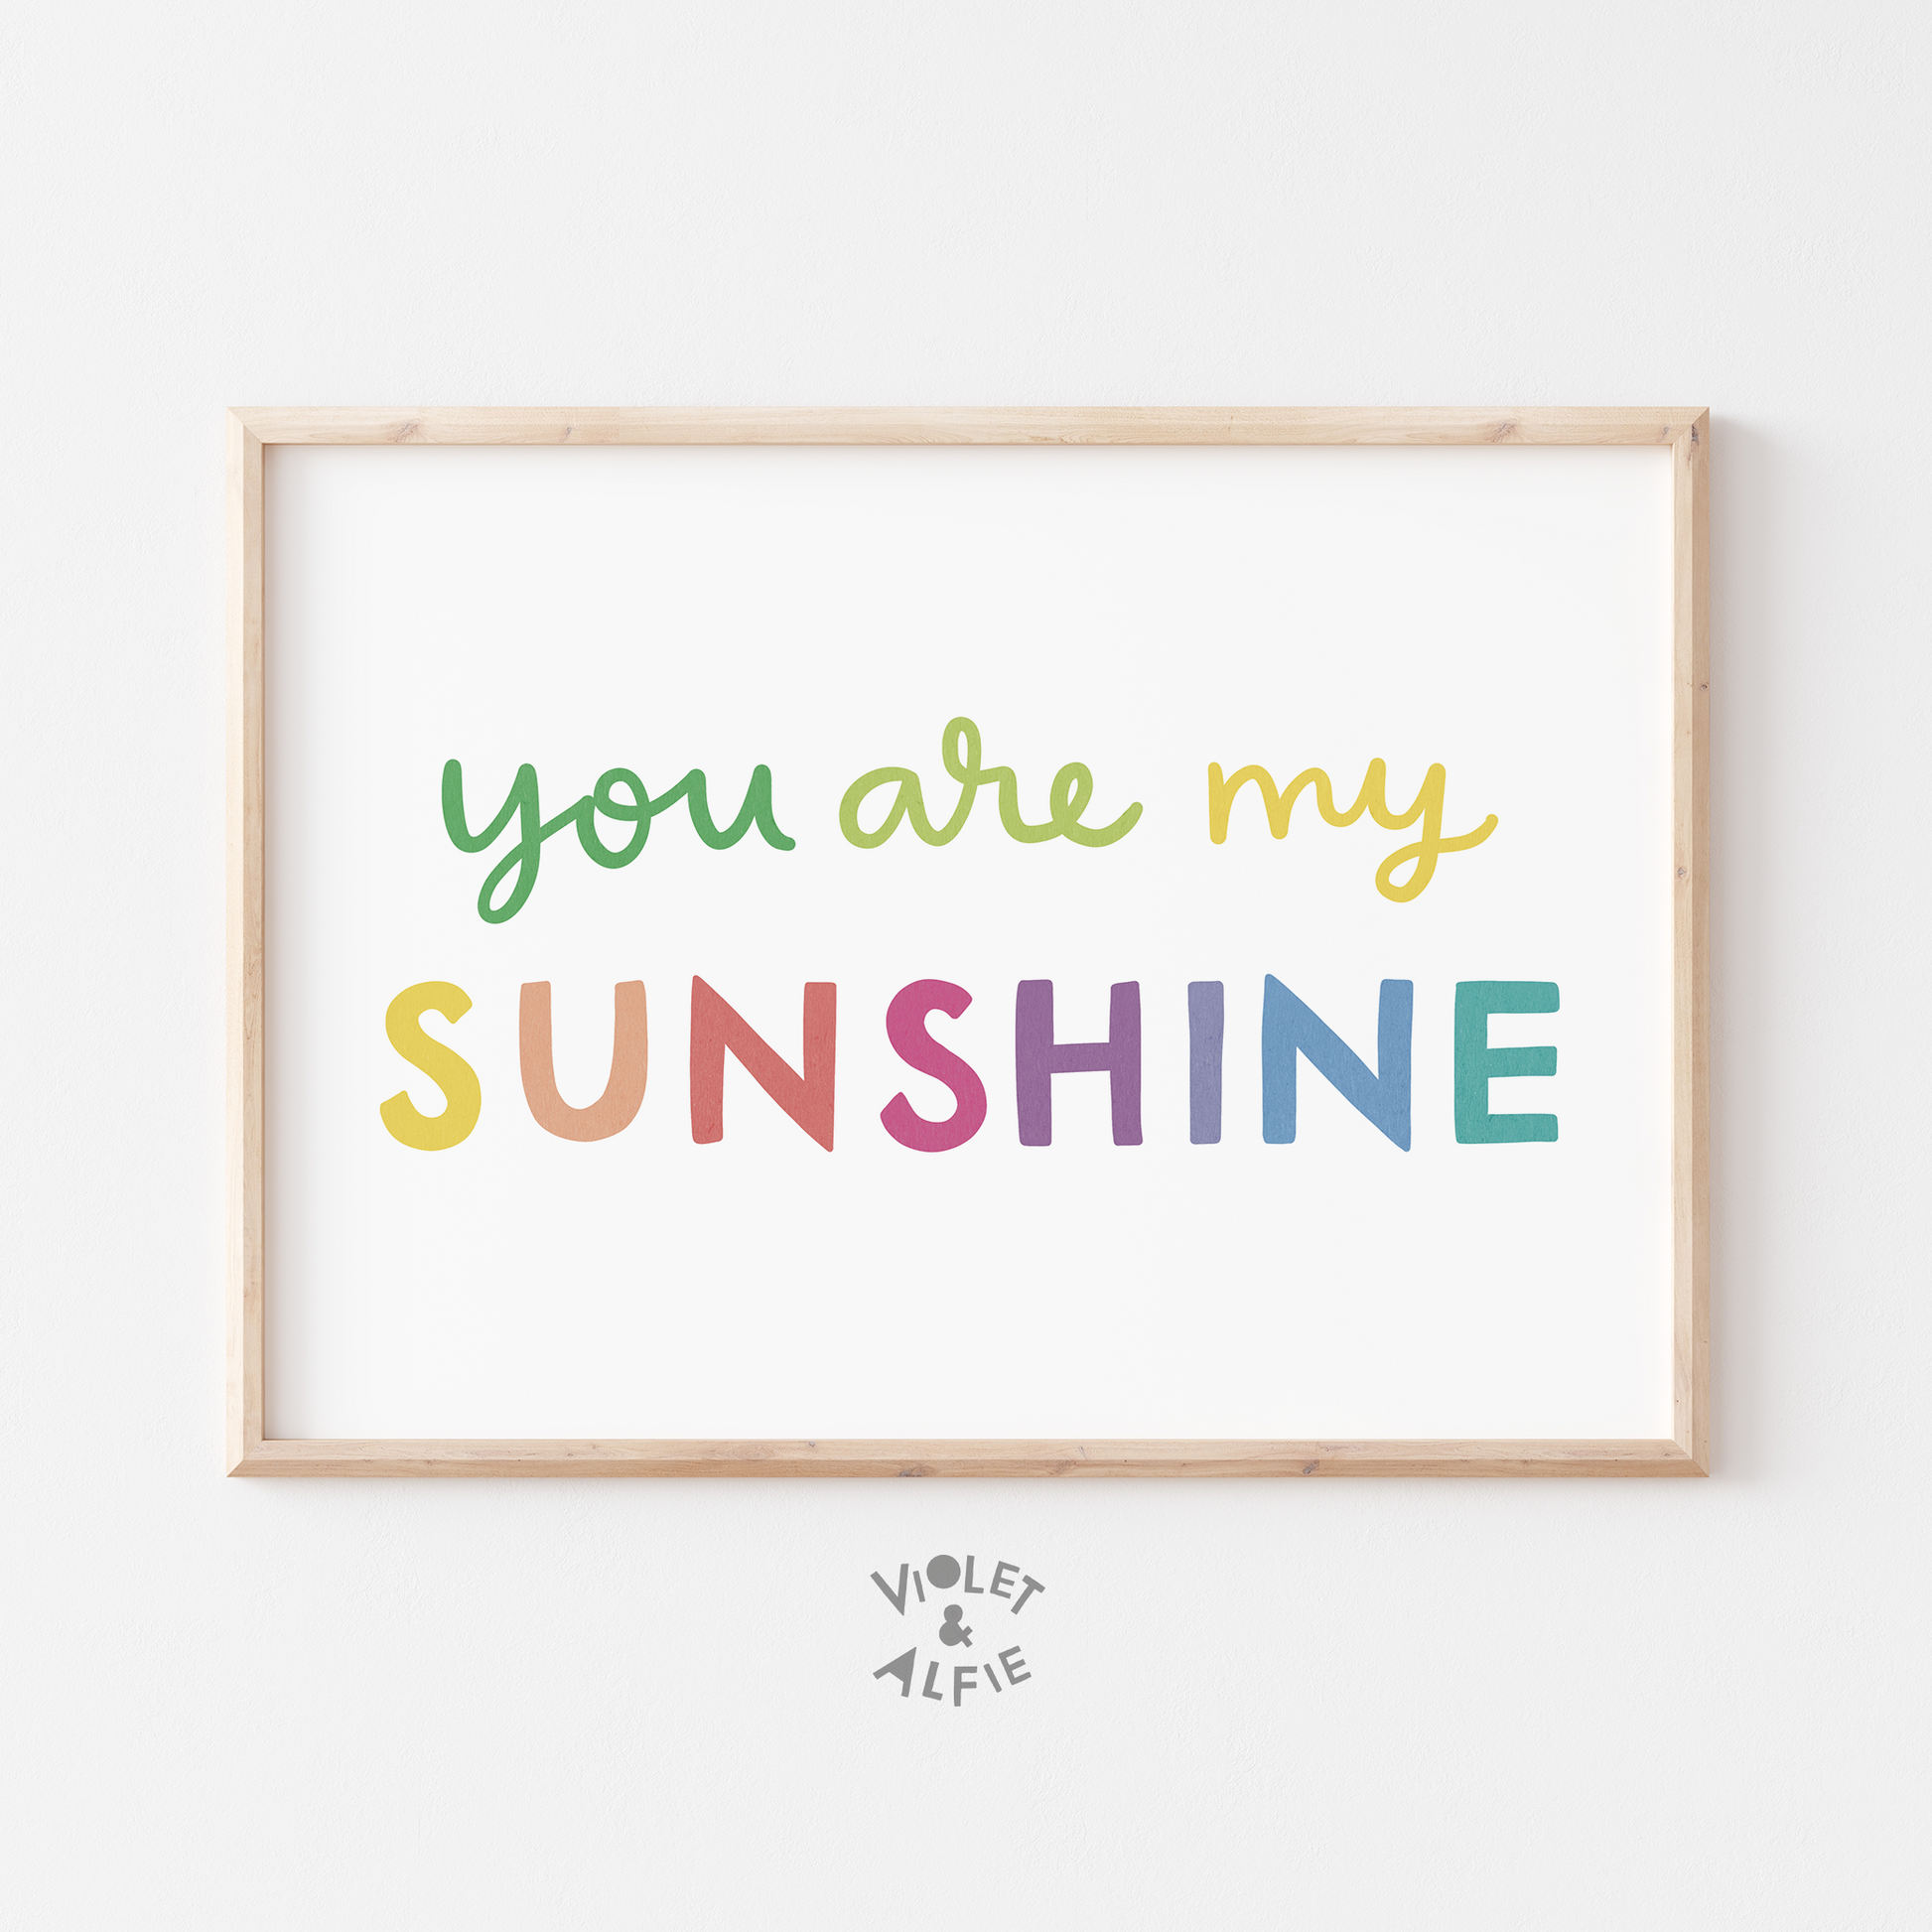 prints for kids rooms, you are my sunshine print, VIOLET AND ALFIE PRINTS,  Typographic Prints,  typographic posters, typographic nursery prints  PASTEL WALL ART  nursery wall art  nursery prints uk, Kids wall art , kids room decor, colourful  prints, colourful wall art for children